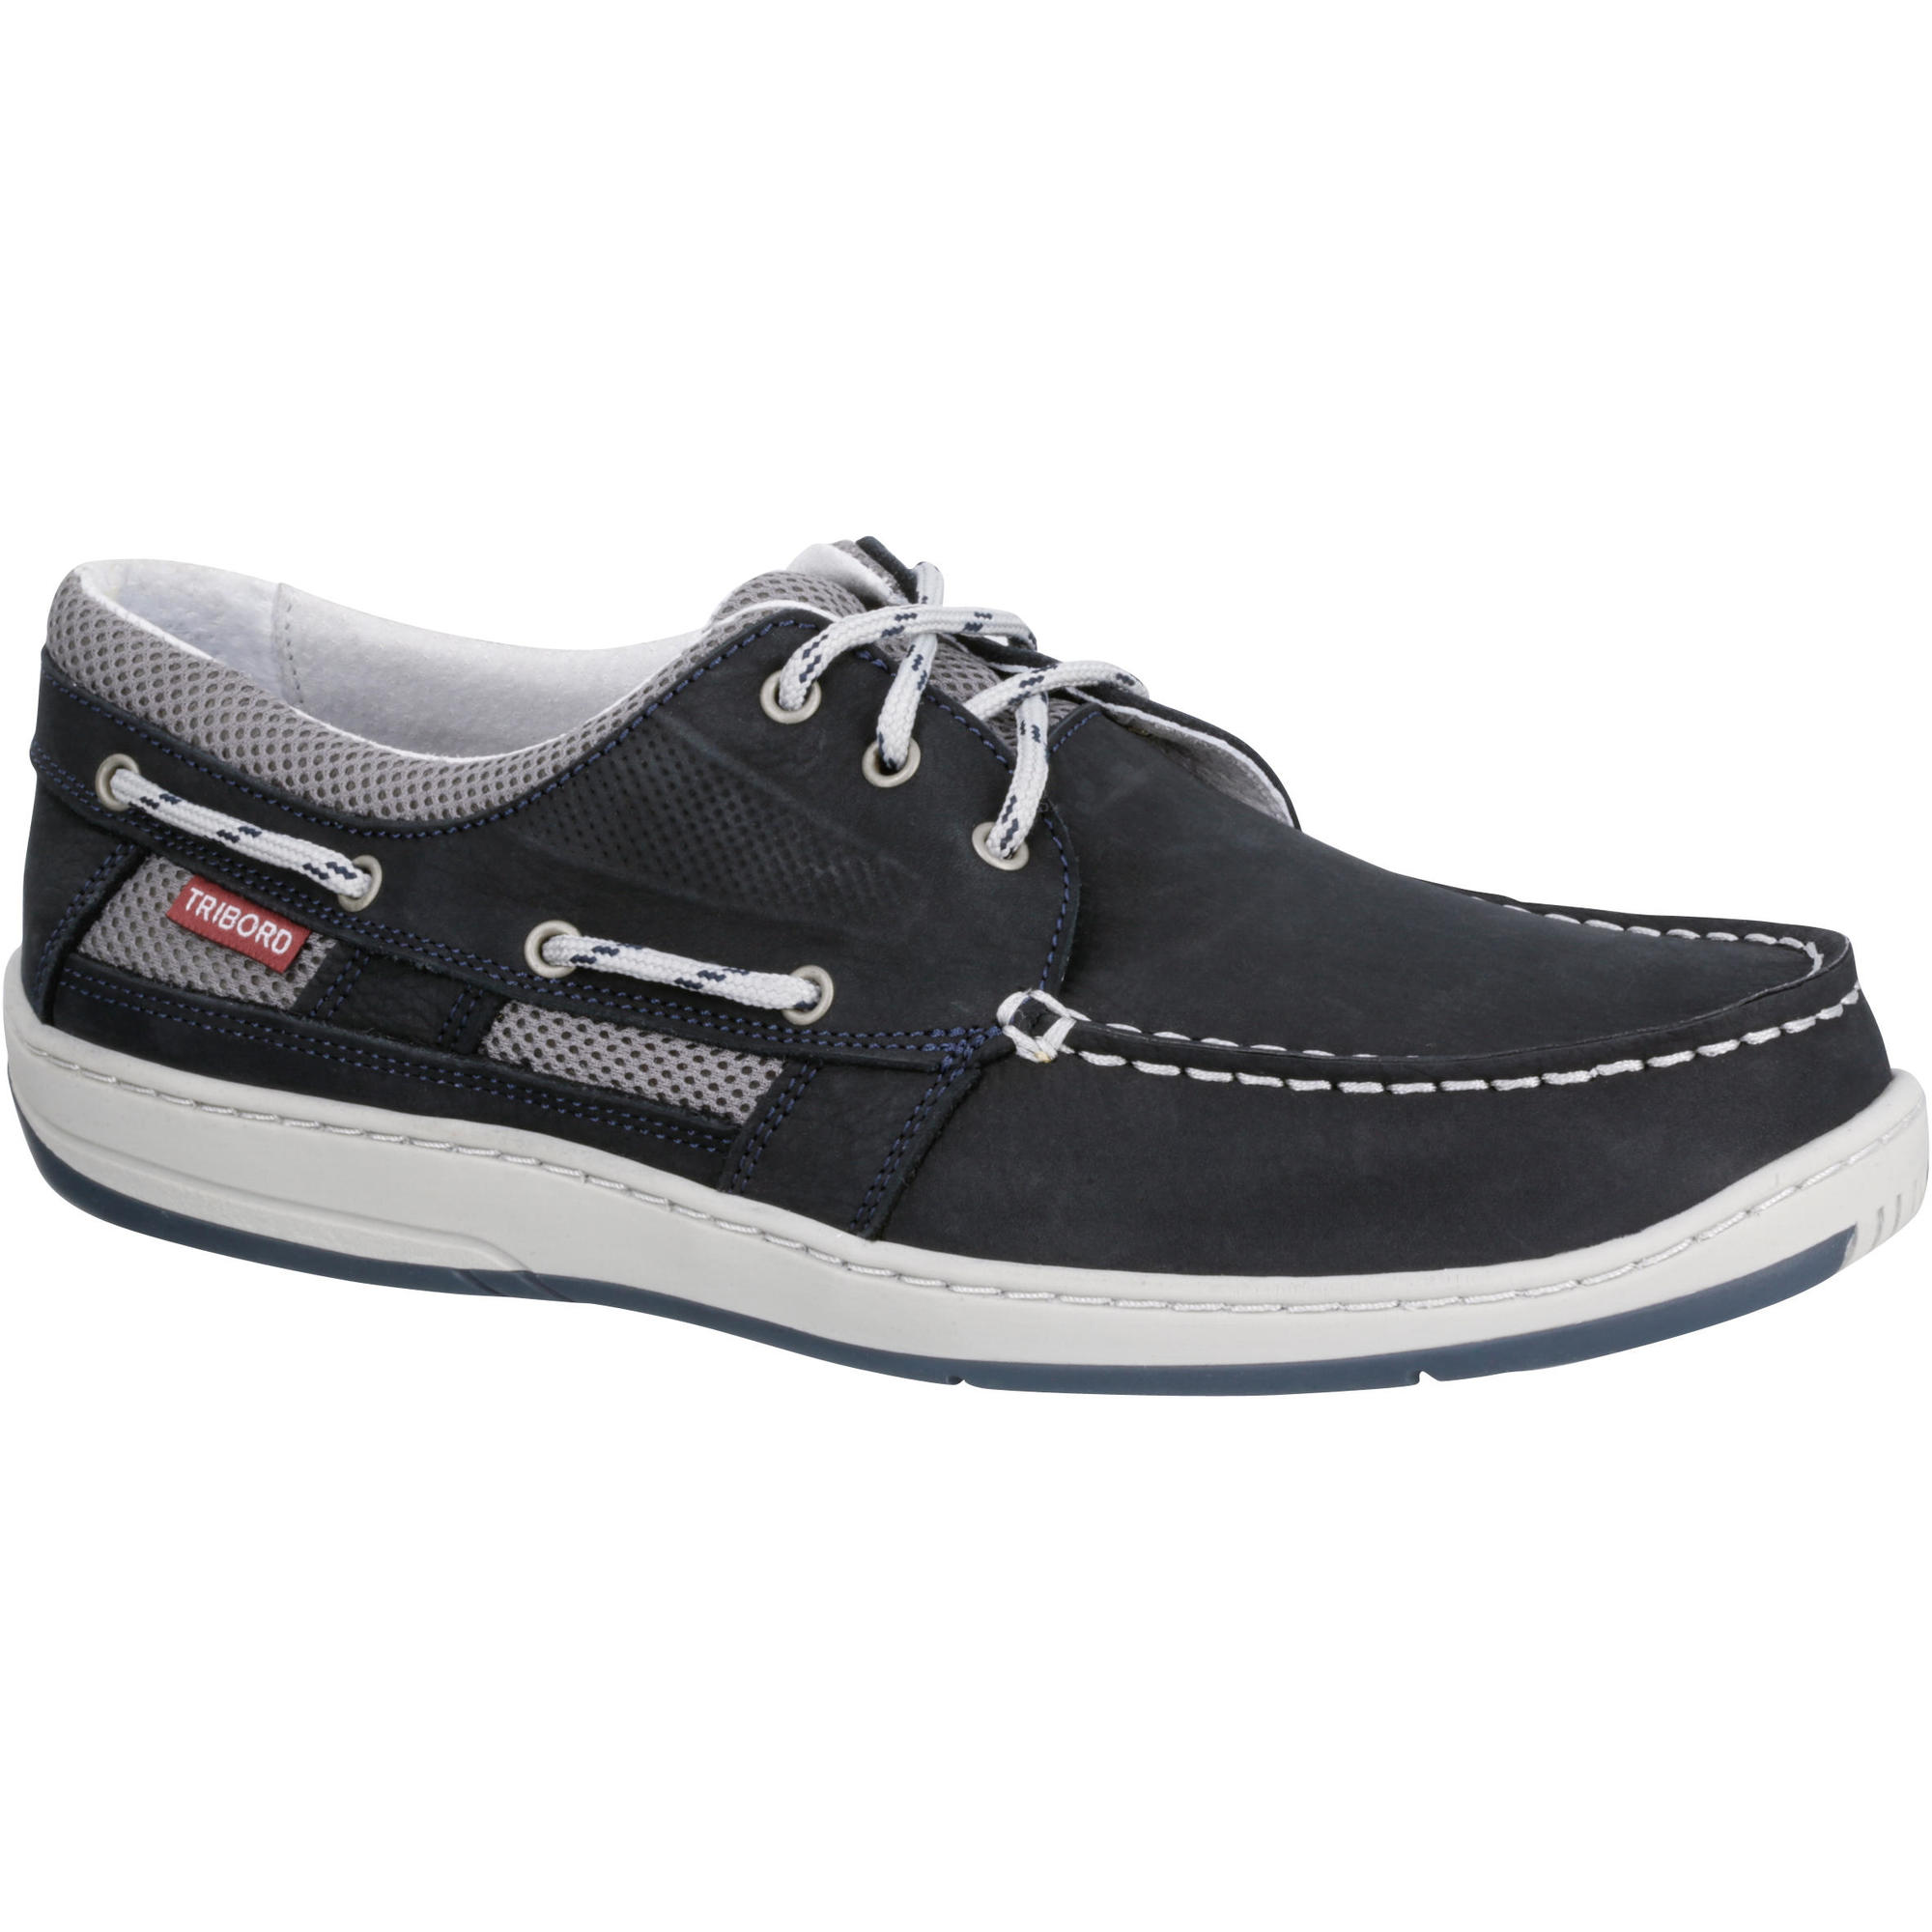 Clipper Men's Leather Boat Shoes - Navy Blue Tribord